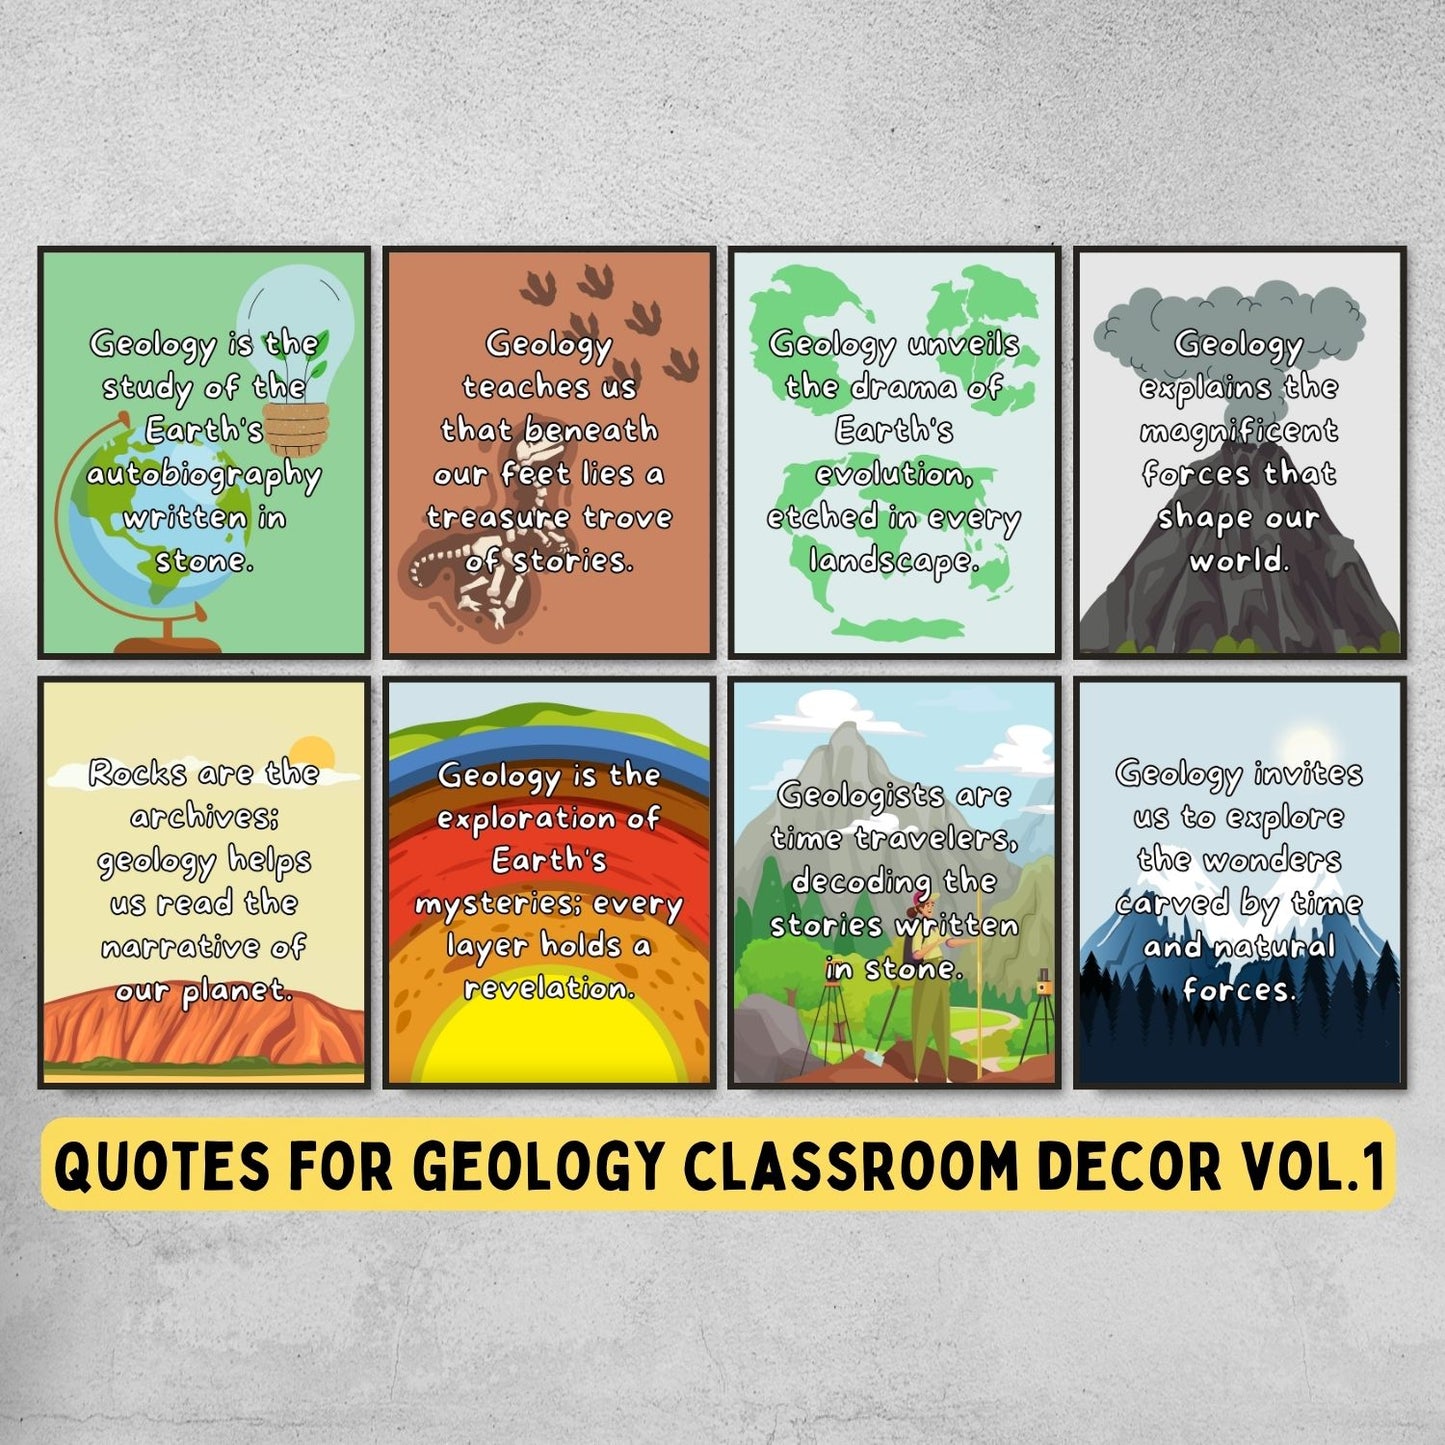 Quotes for Geology classroom decoration - Vol.1